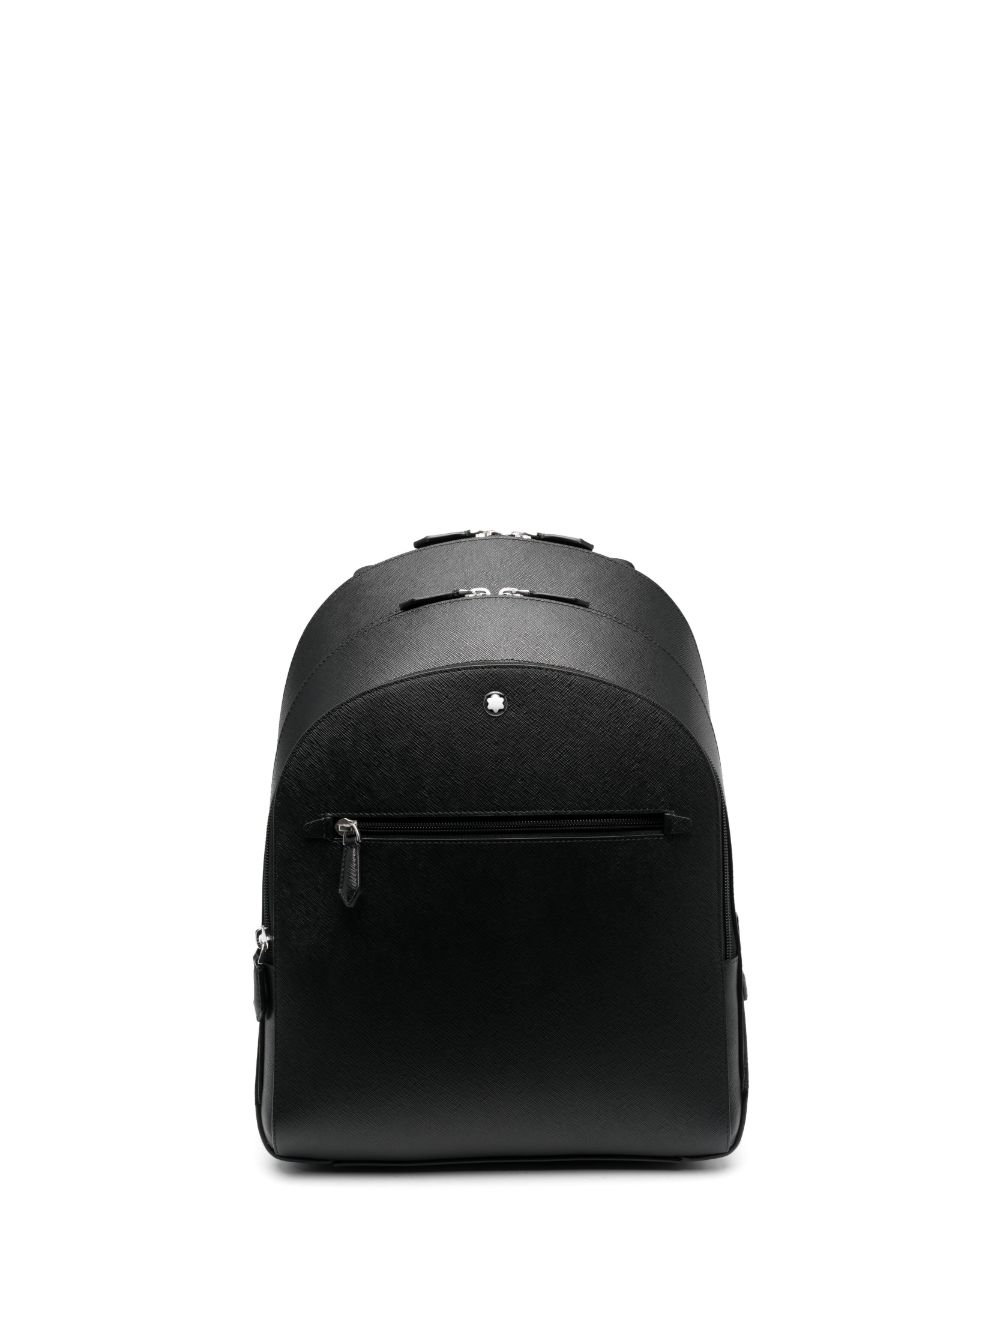 Louis Vuitton Saffiano Leather Backpack - Black Backpacks, Bags